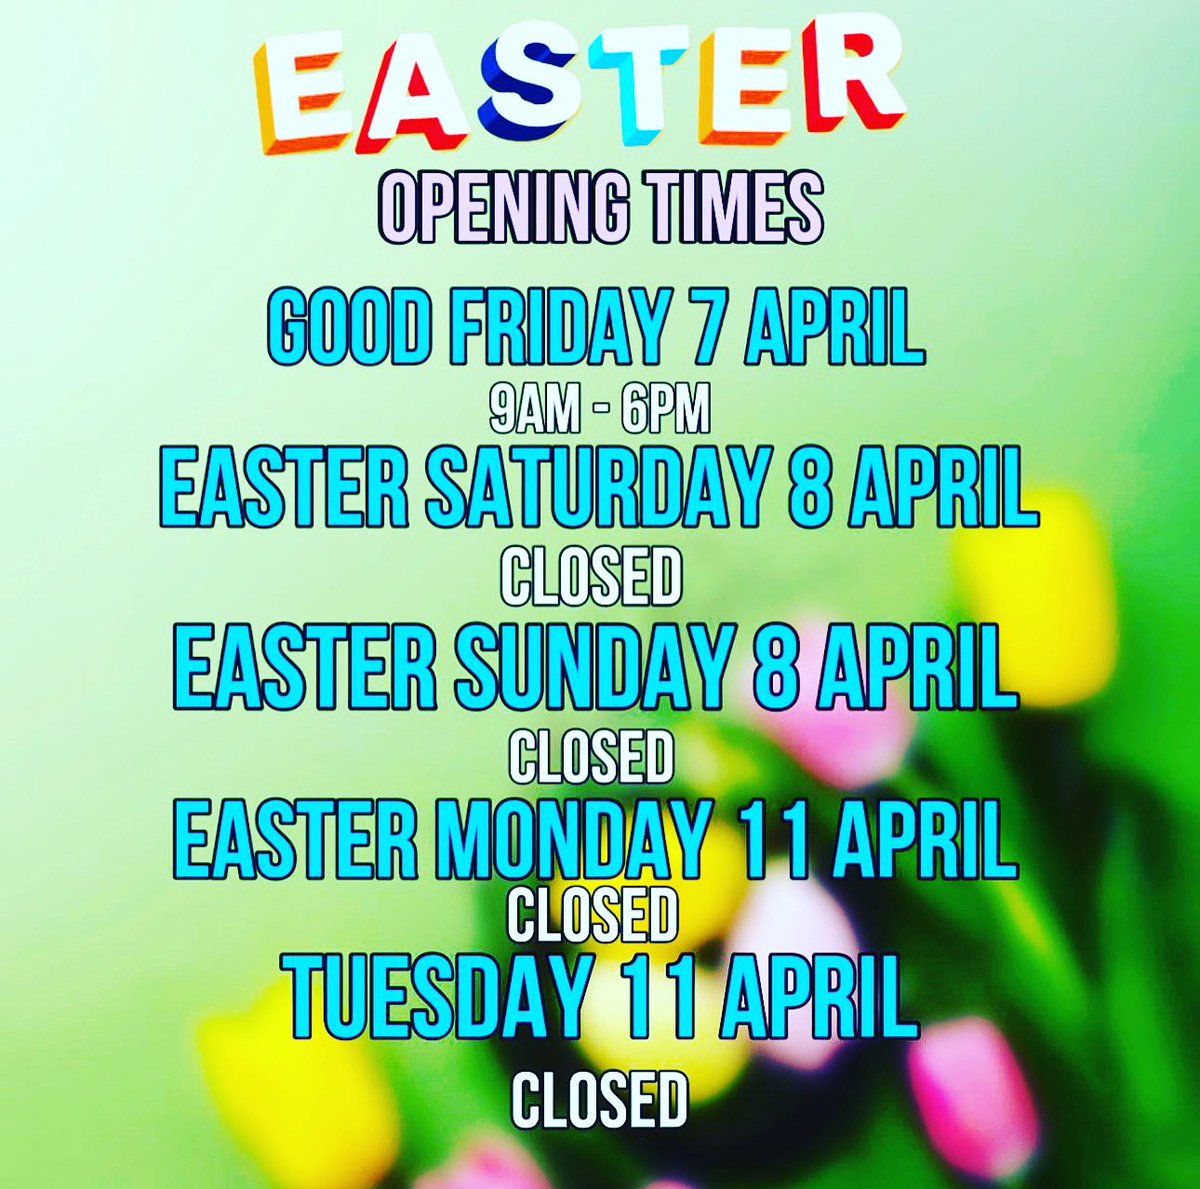 #Happy #Easter from #Team #HarperAndQuinn #HaveFun #Wilmslow #Cheshire #Knutsford #Hale #Manchester #AlderleyEdge #HairSalon 🥳 we will be back in on #Wednesday 12th #April